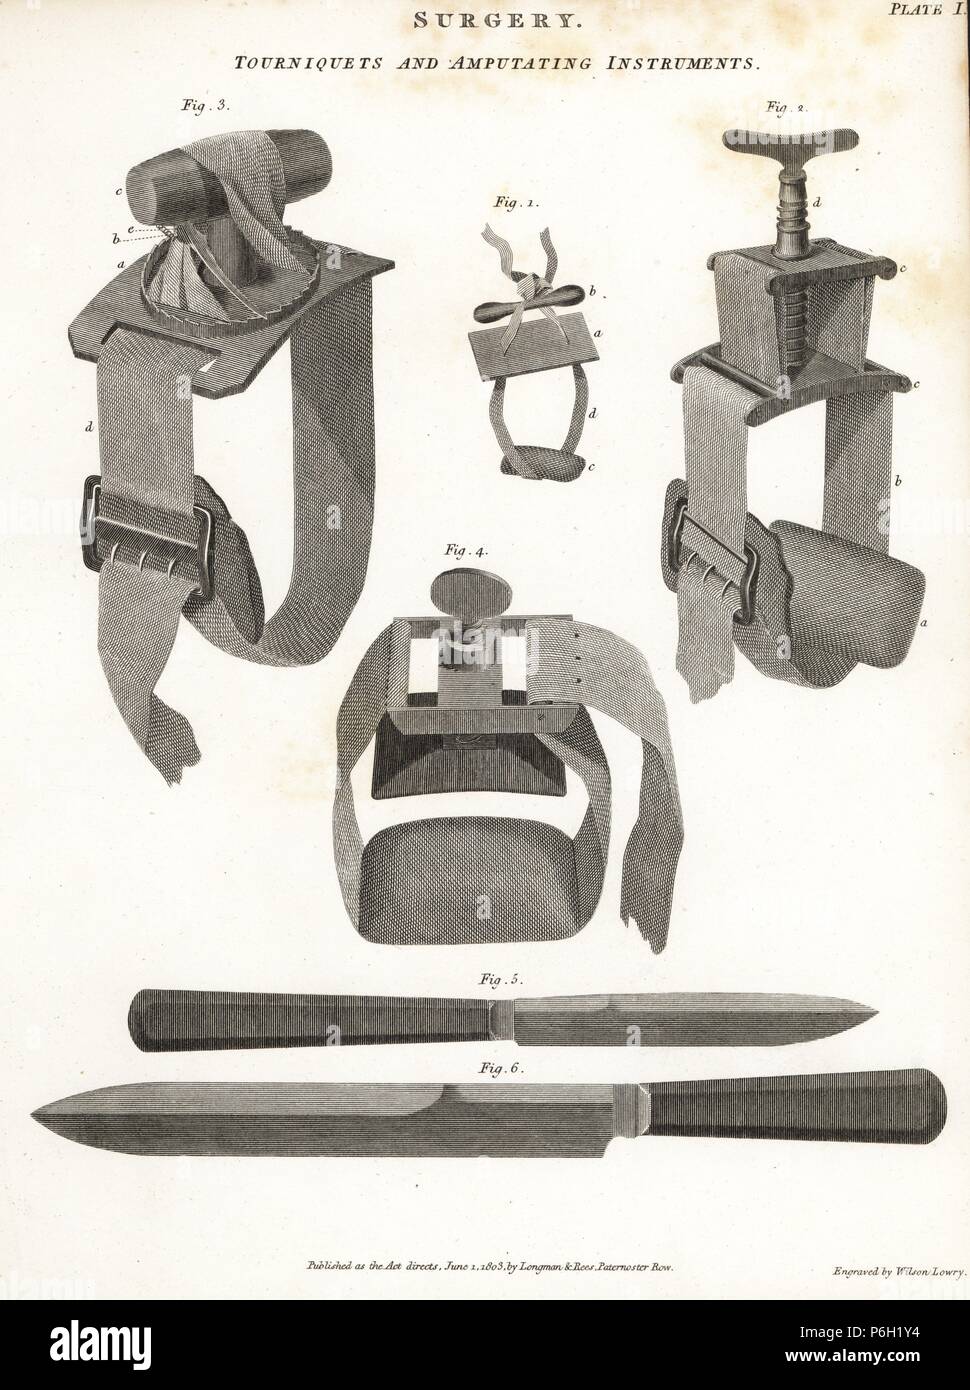 Surgical equipment including tourniquets and amputation instruments from the 19th century. Copperplate engraving by Wilson Lowry from Abraham Rees' "Cyclopedia or Universal Dictionary," London, 1816. Stock Photo